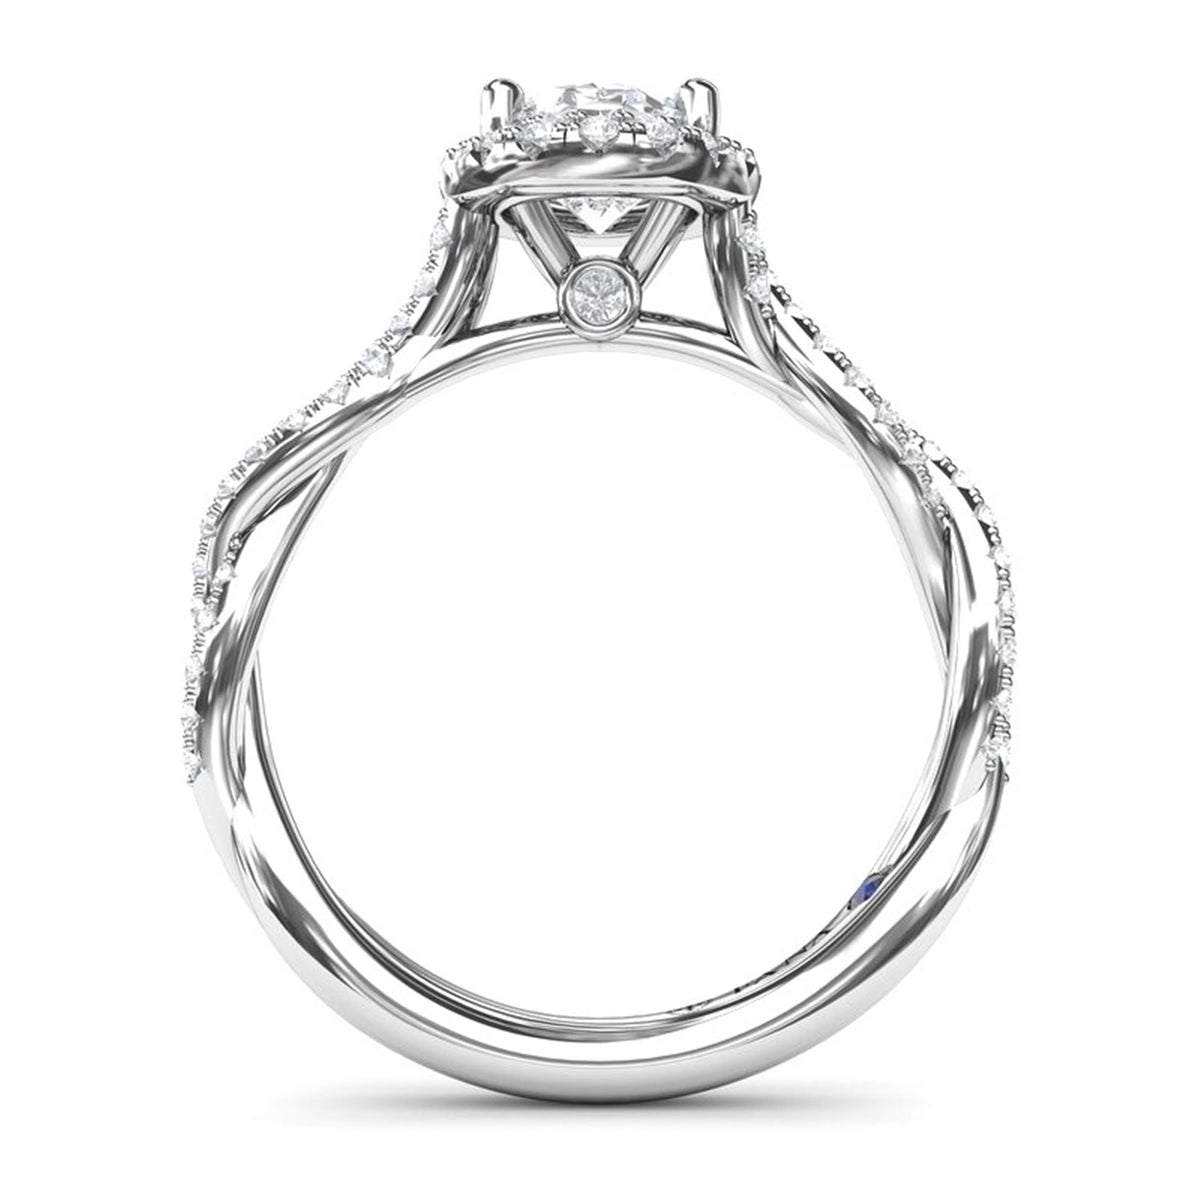 14Kt White Gold Free-Form Engagement Ring Mounting With 0.41cttw Natural Diamonds